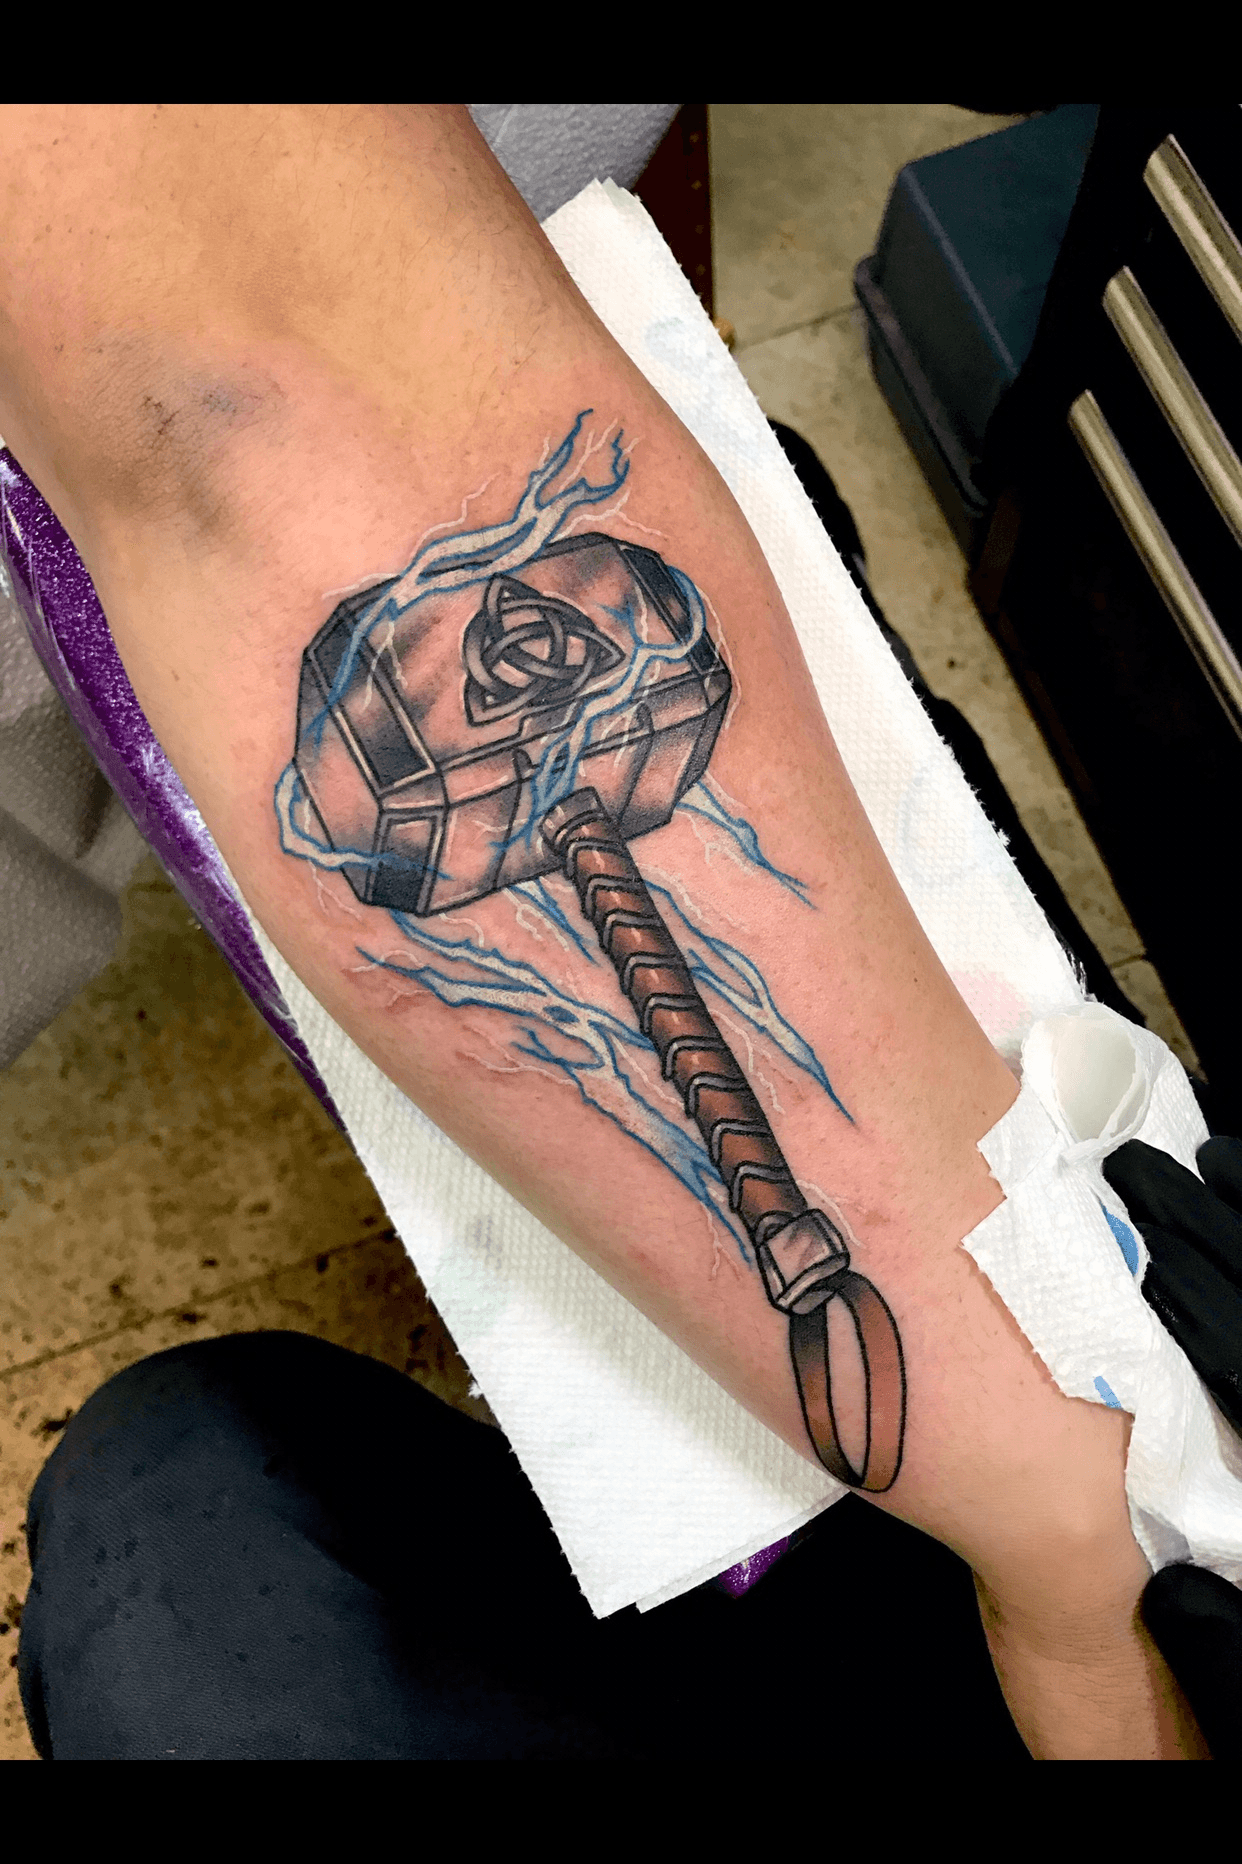 101 Amazing Mjolnir Tattoo Designs You Need To See  Thor tattoo Marvel  tattoos Mjolnir tattoo